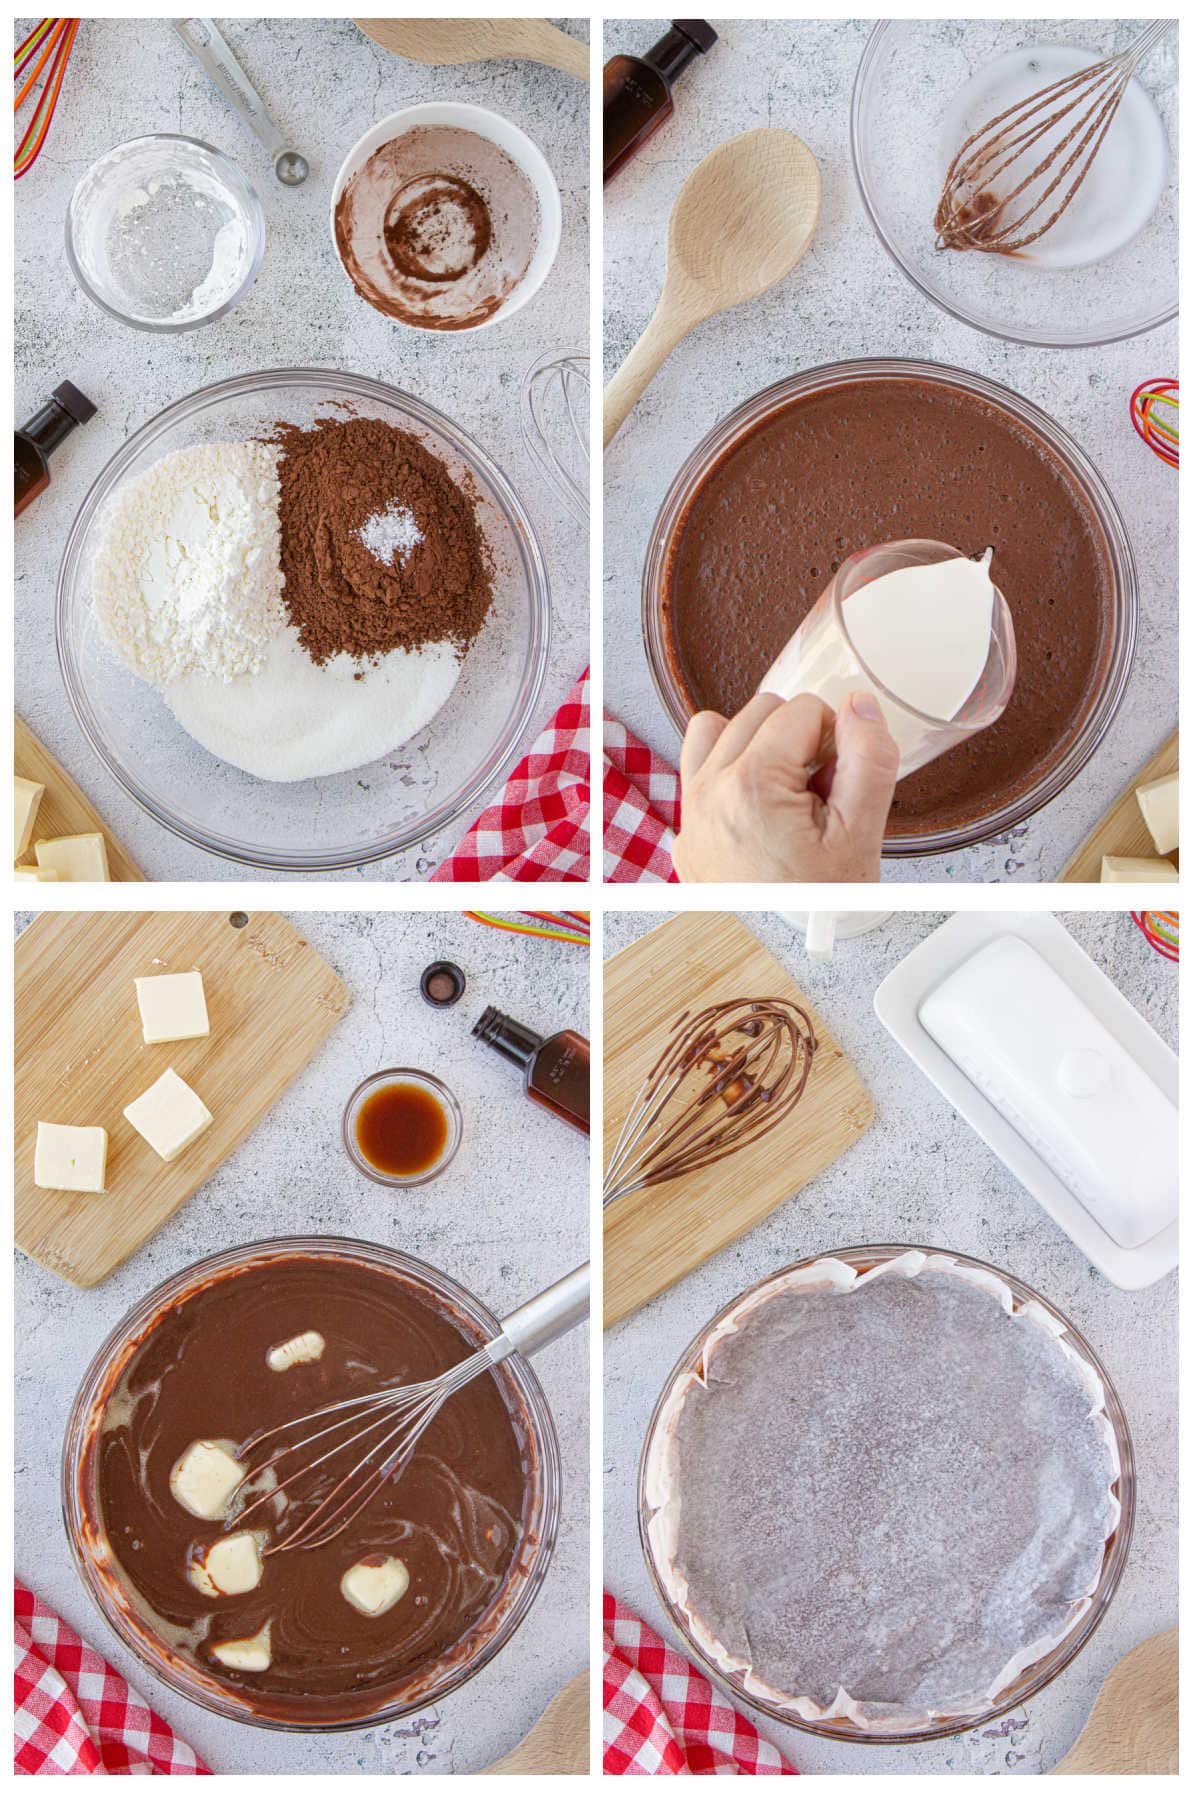 Step by step images showing how to make chocolate pudding.